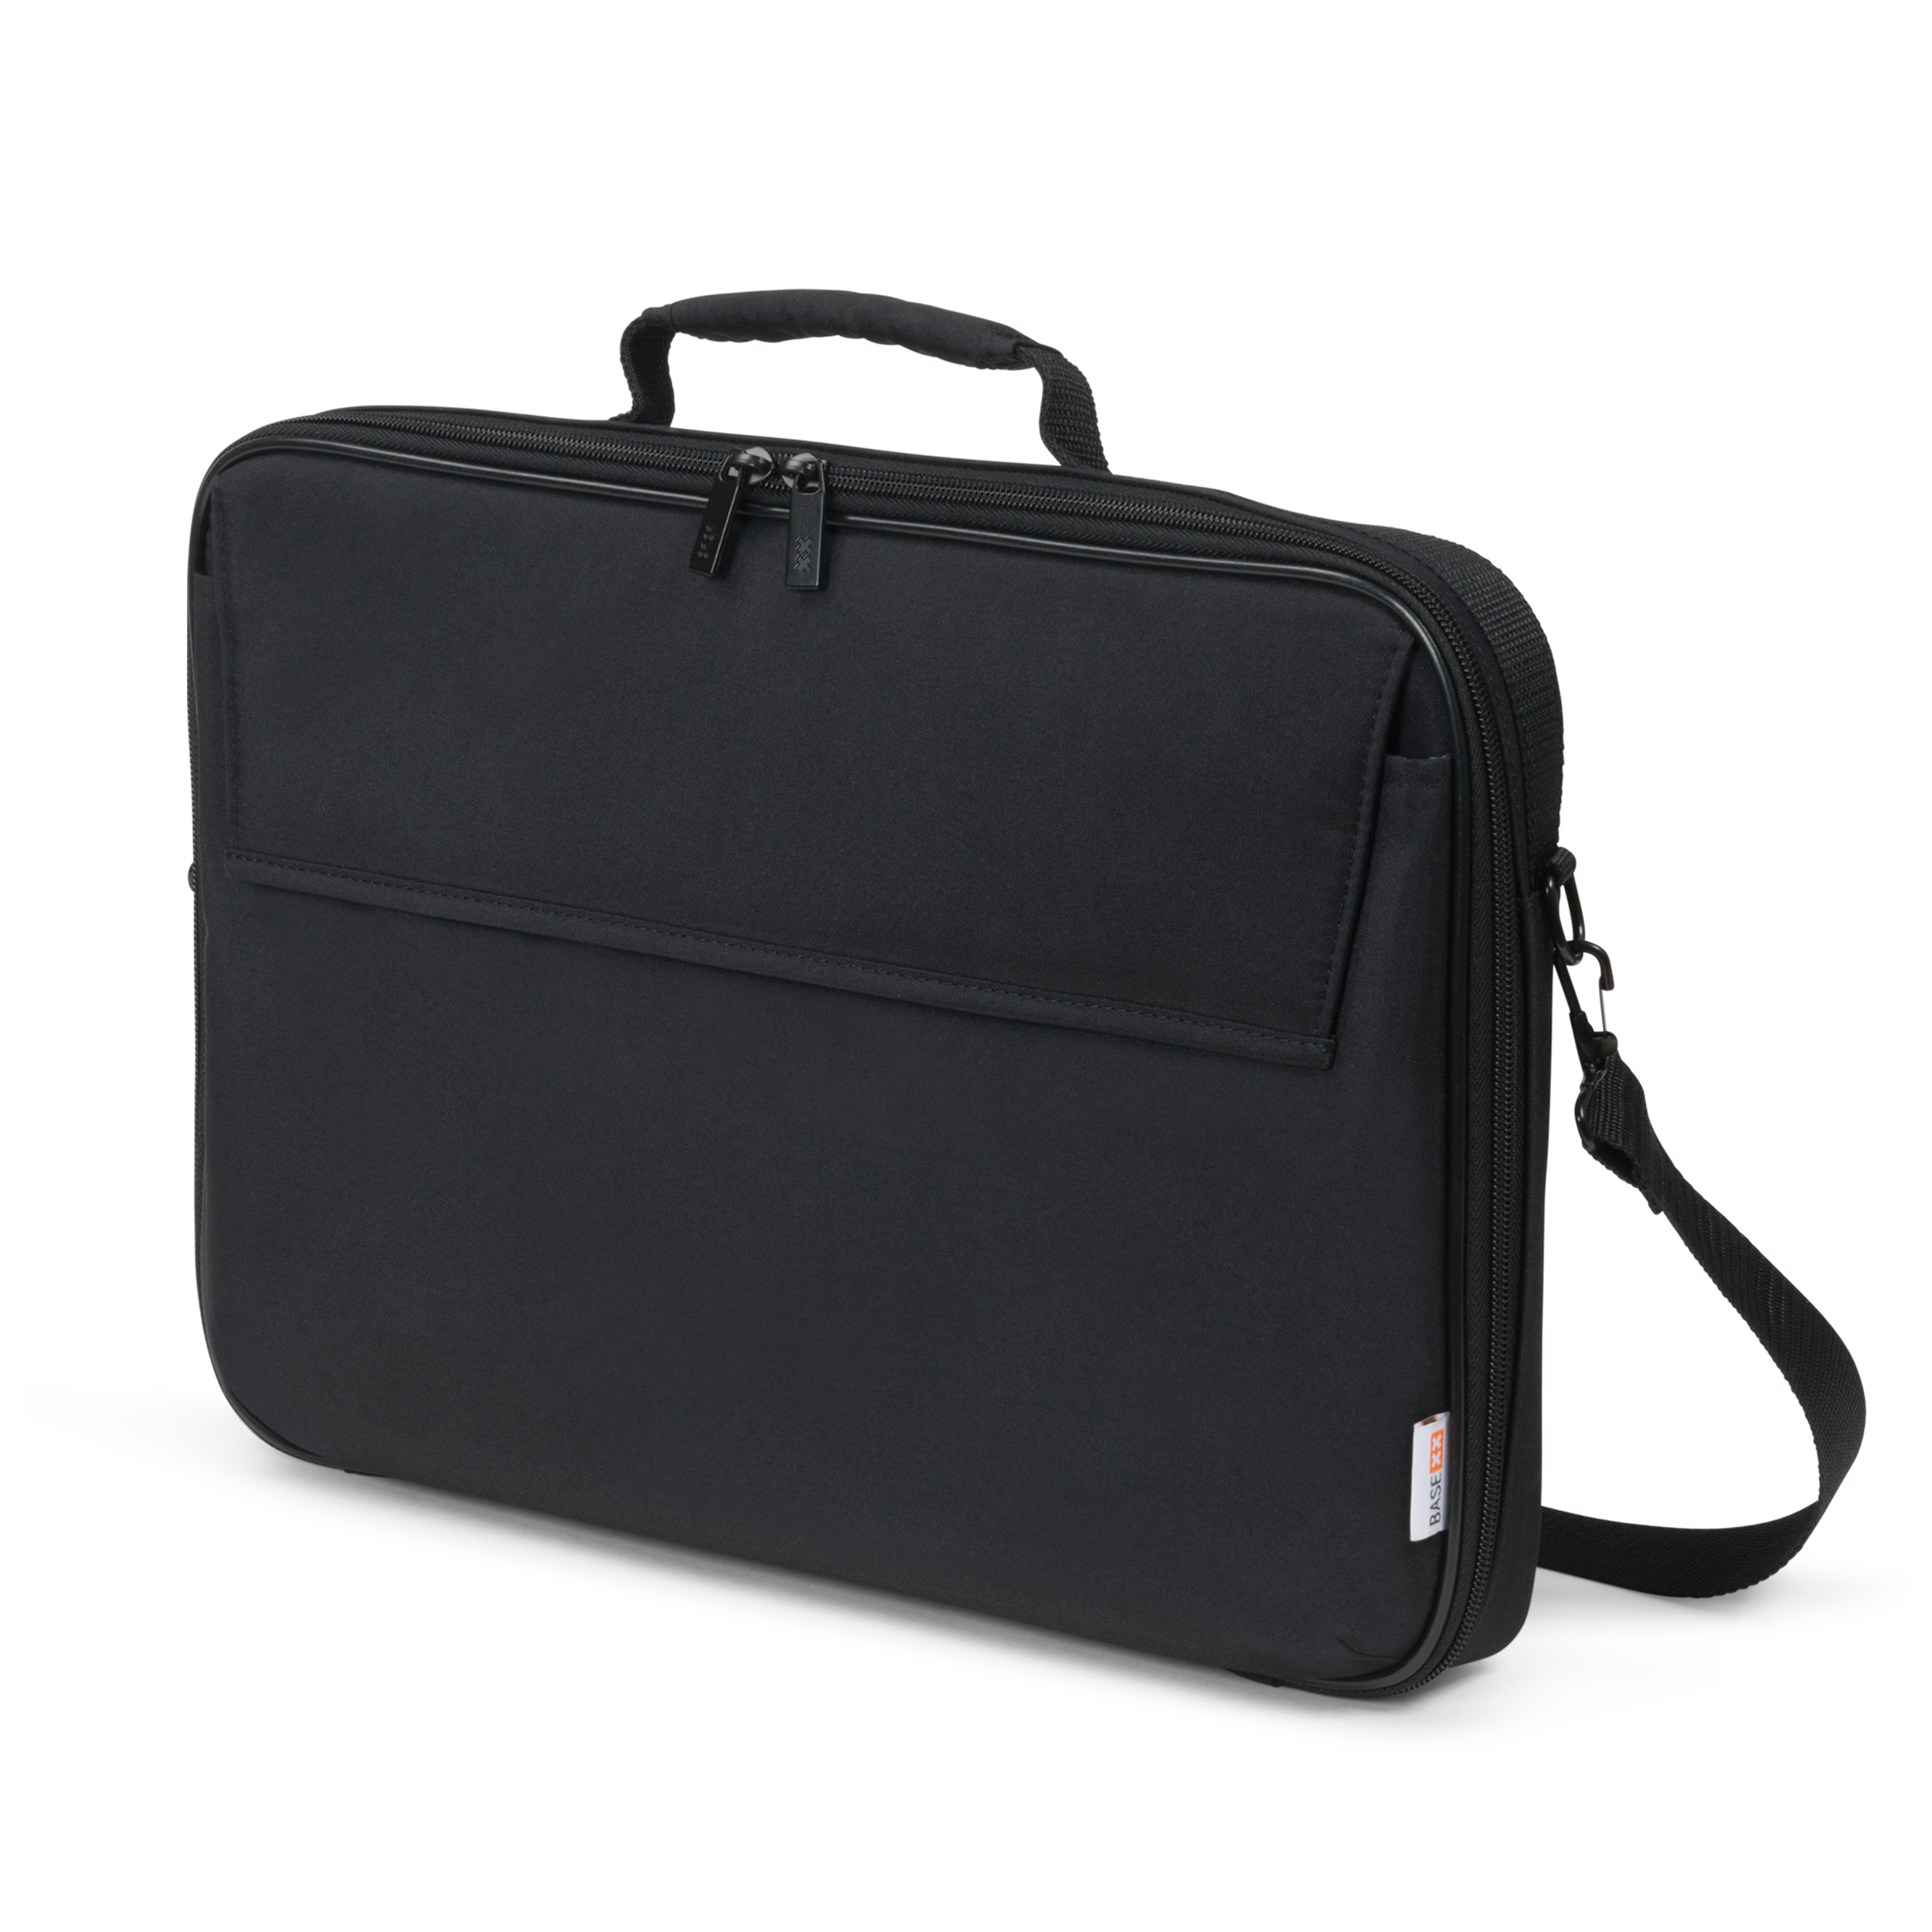 Dicota - Consignment             Base Xx Laptop Bag Clamshell        13-14.1in Black                     D31794